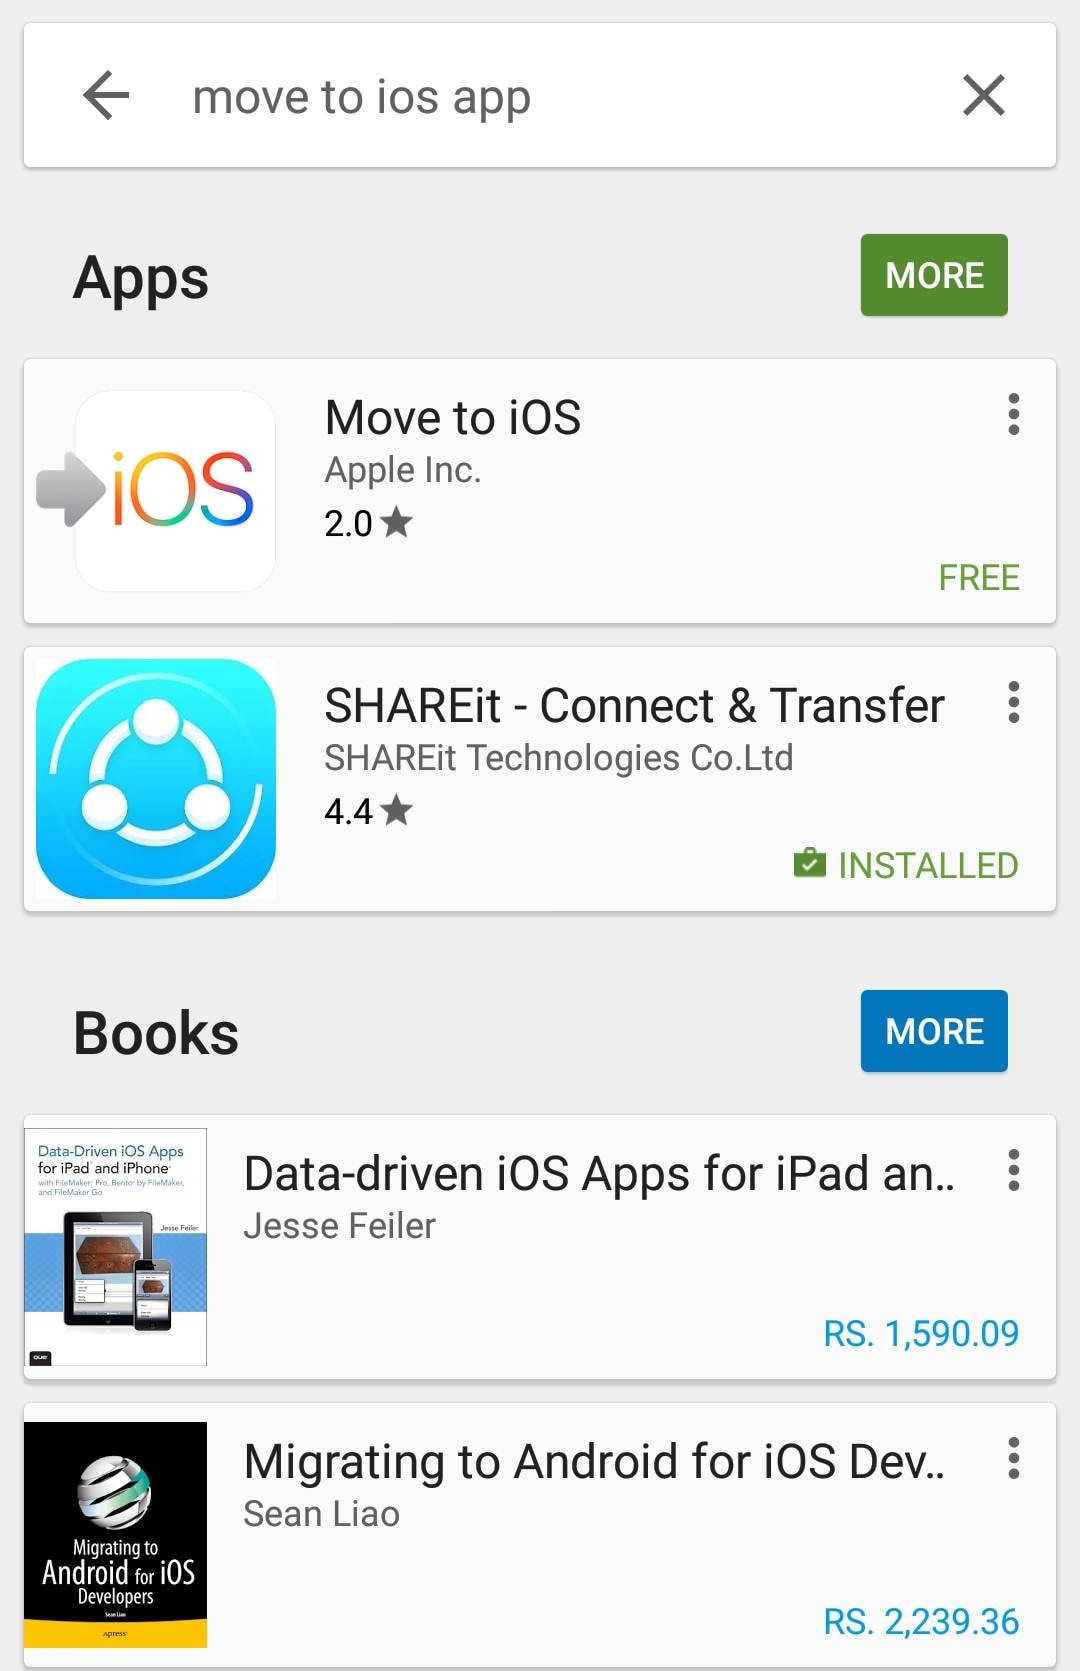 How to Transfer Android Data to iOS 9